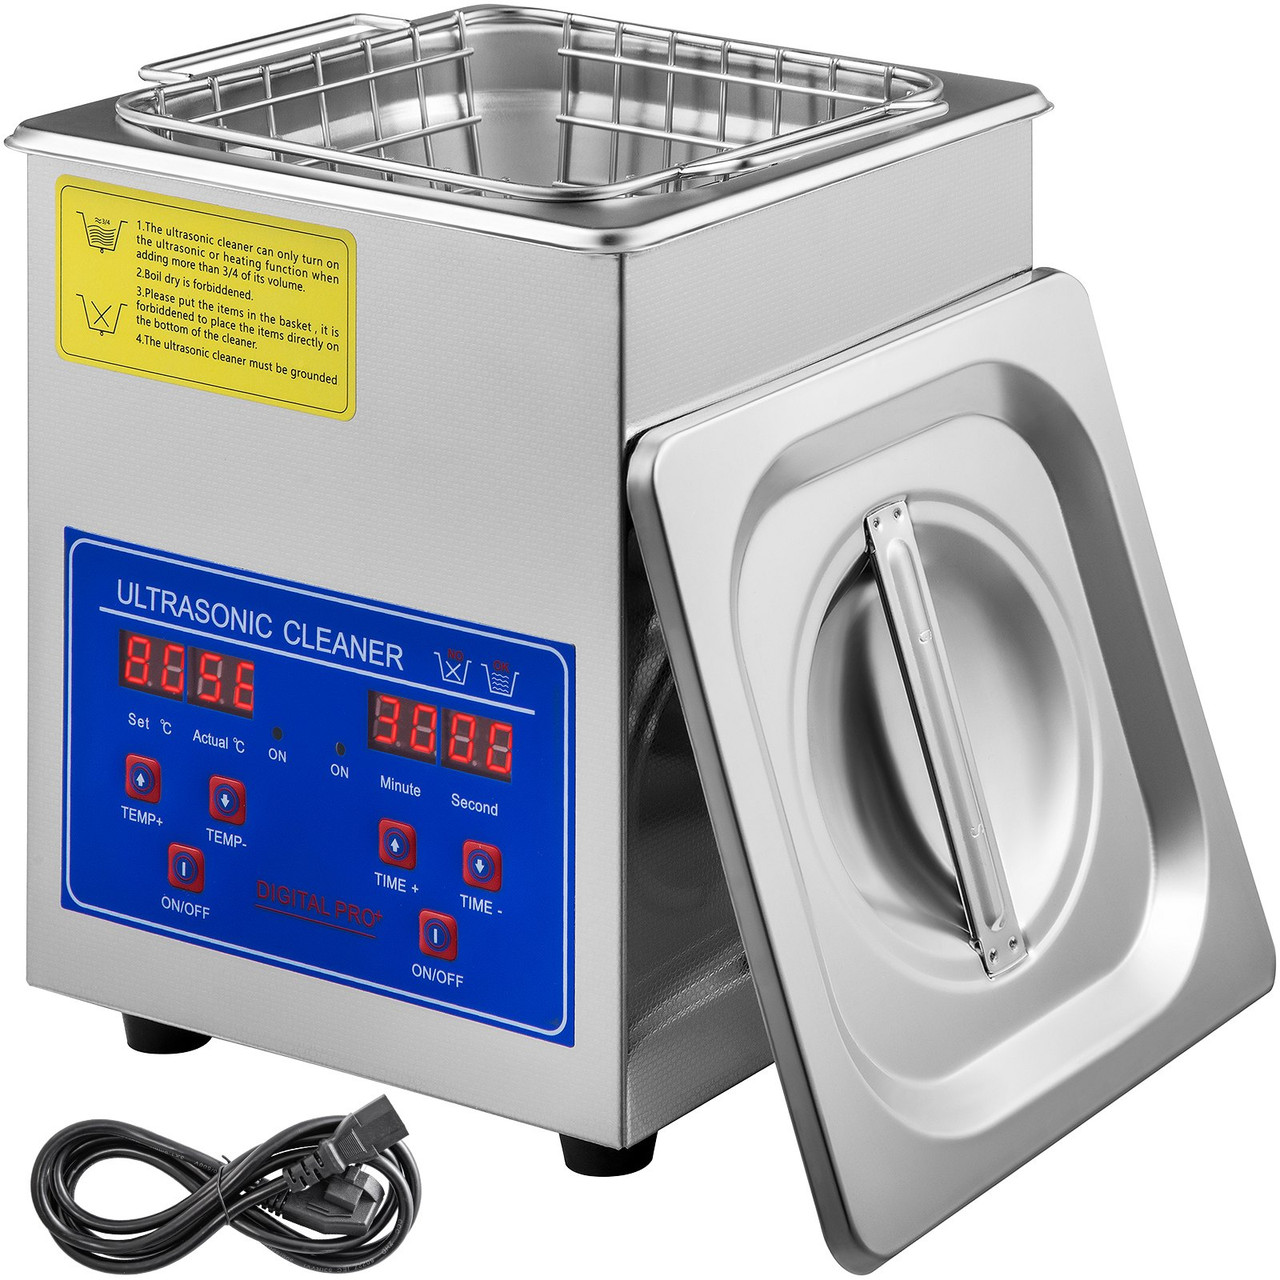 Ultrasonic Cleaner 2L Digital Ultrasonic Parts Cleaner with Timer 40kHz Professional 304 Stainless Steel Ultrasonic Cleaner 110V for Jewelry Watch Glasses Diamond Eyeglass Small Parts Cleaning